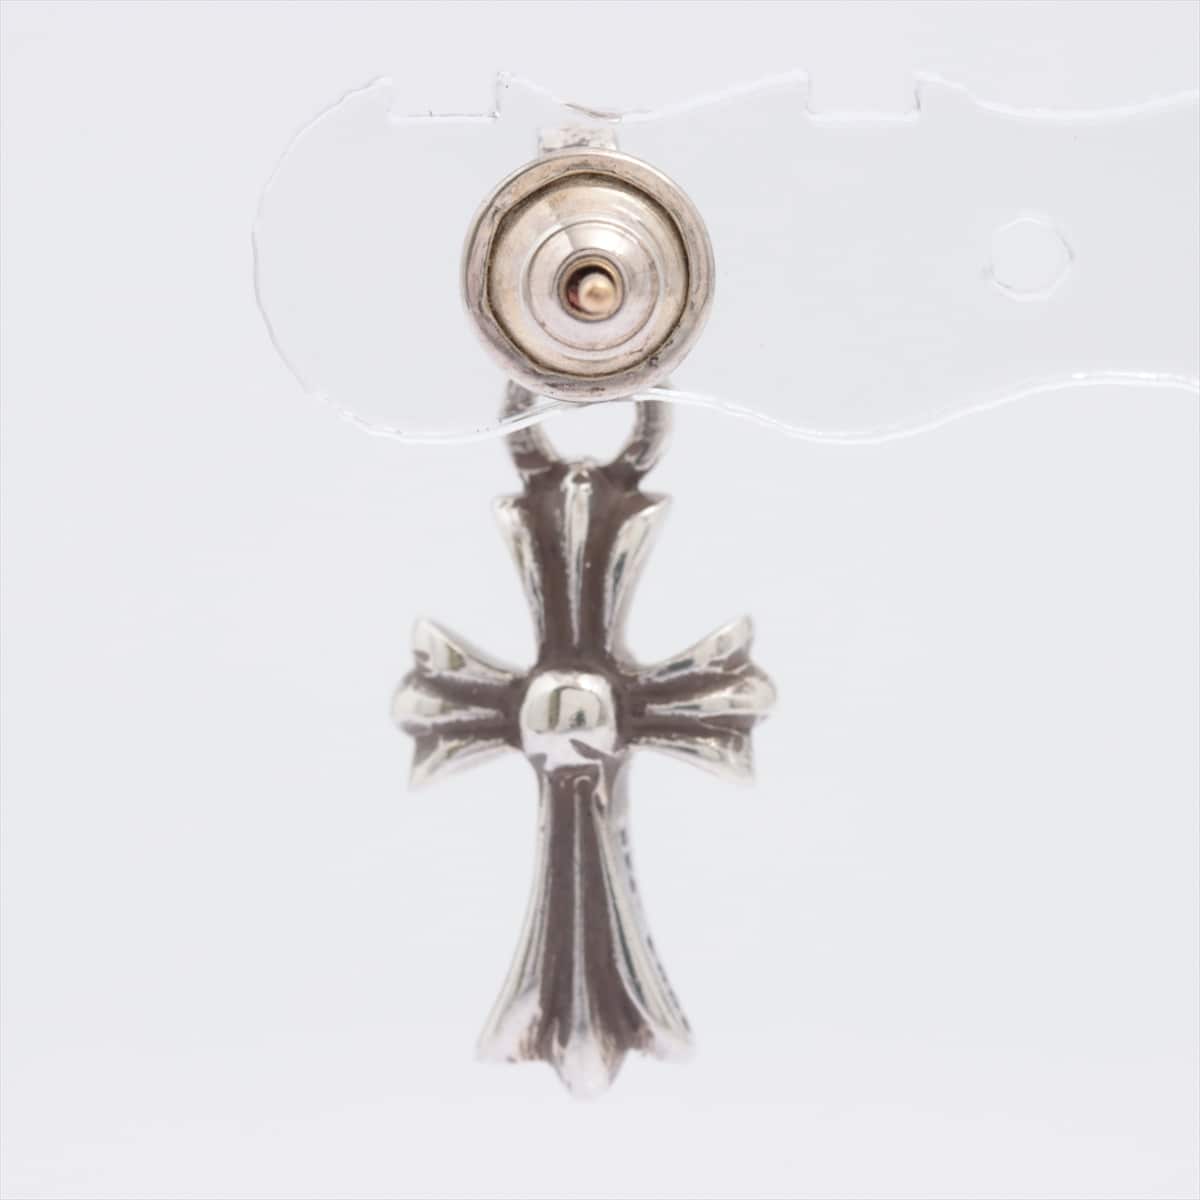 Chrome Hearts CH Cross Baby fat charms Piercing jewelry 925×14K 2.6g With invoice